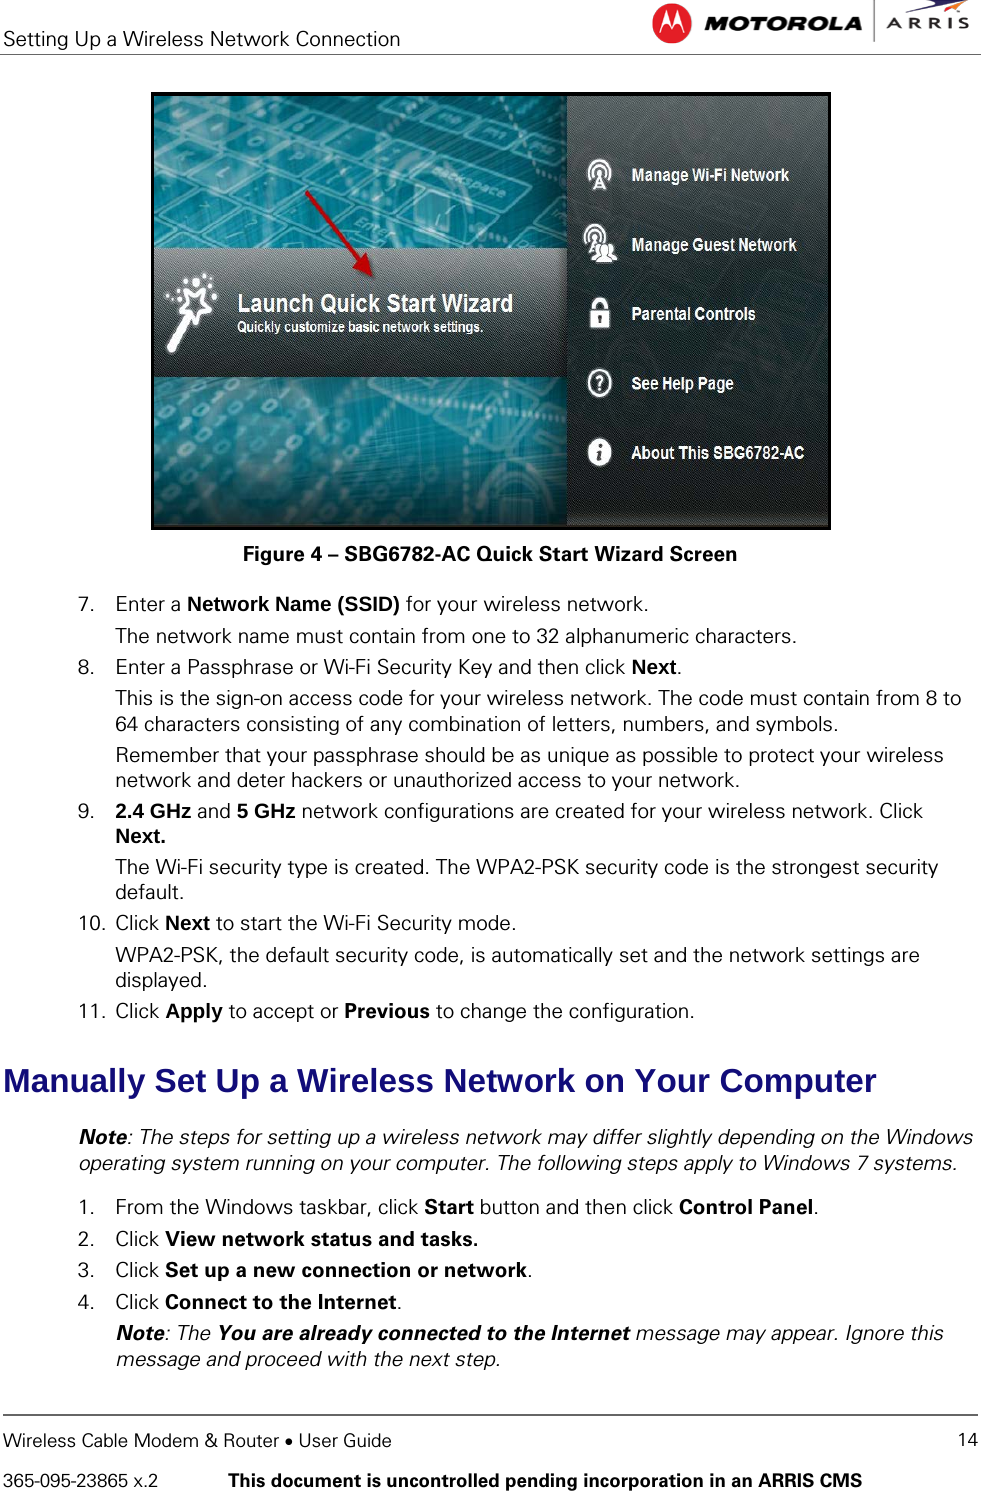 Setting Up a Wireless Network Connection   Wireless Cable Modem &amp; Router • User Guide 14 365-095-23865 x.2   This document is uncontrolled pending incorporation in an ARRIS CMS   Figure 4 – SBG6782-AC Quick Start Wizard Screen 7. Enter a Network Name (SSID) for your wireless network. The network name must contain from one to 32 alphanumeric characters. 8. Enter a Passphrase or Wi-Fi Security Key and then click Next. This is the sign-on access code for your wireless network. The code must contain from 8 to 64 characters consisting of any combination of letters, numbers, and symbols.  Remember that your passphrase should be as unique as possible to protect your wireless network and deter hackers or unauthorized access to your network. 9. 2.4 GHz and 5 GHz network configurations are created for your wireless network. Click Next. The Wi-Fi security type is created. The WPA2-PSK security code is the strongest security default.  10. Click Next to start the Wi-Fi Security mode. WPA2-PSK, the default security code, is automatically set and the network settings are displayed. 11. Click Apply to accept or Previous to change the configuration. Manually Set Up a Wireless Network on Your Computer Note: The steps for setting up a wireless network may differ slightly depending on the Windows operating system running on your computer. The following steps apply to Windows 7 systems. 1. From the Windows taskbar, click Start button and then click Control Panel. 2. Click View network status and tasks. 3. Click Set up a new connection or network. 4. Click Connect to the Internet. Note: The You are already connected to the Internet message may appear. Ignore this message and proceed with the next step. 